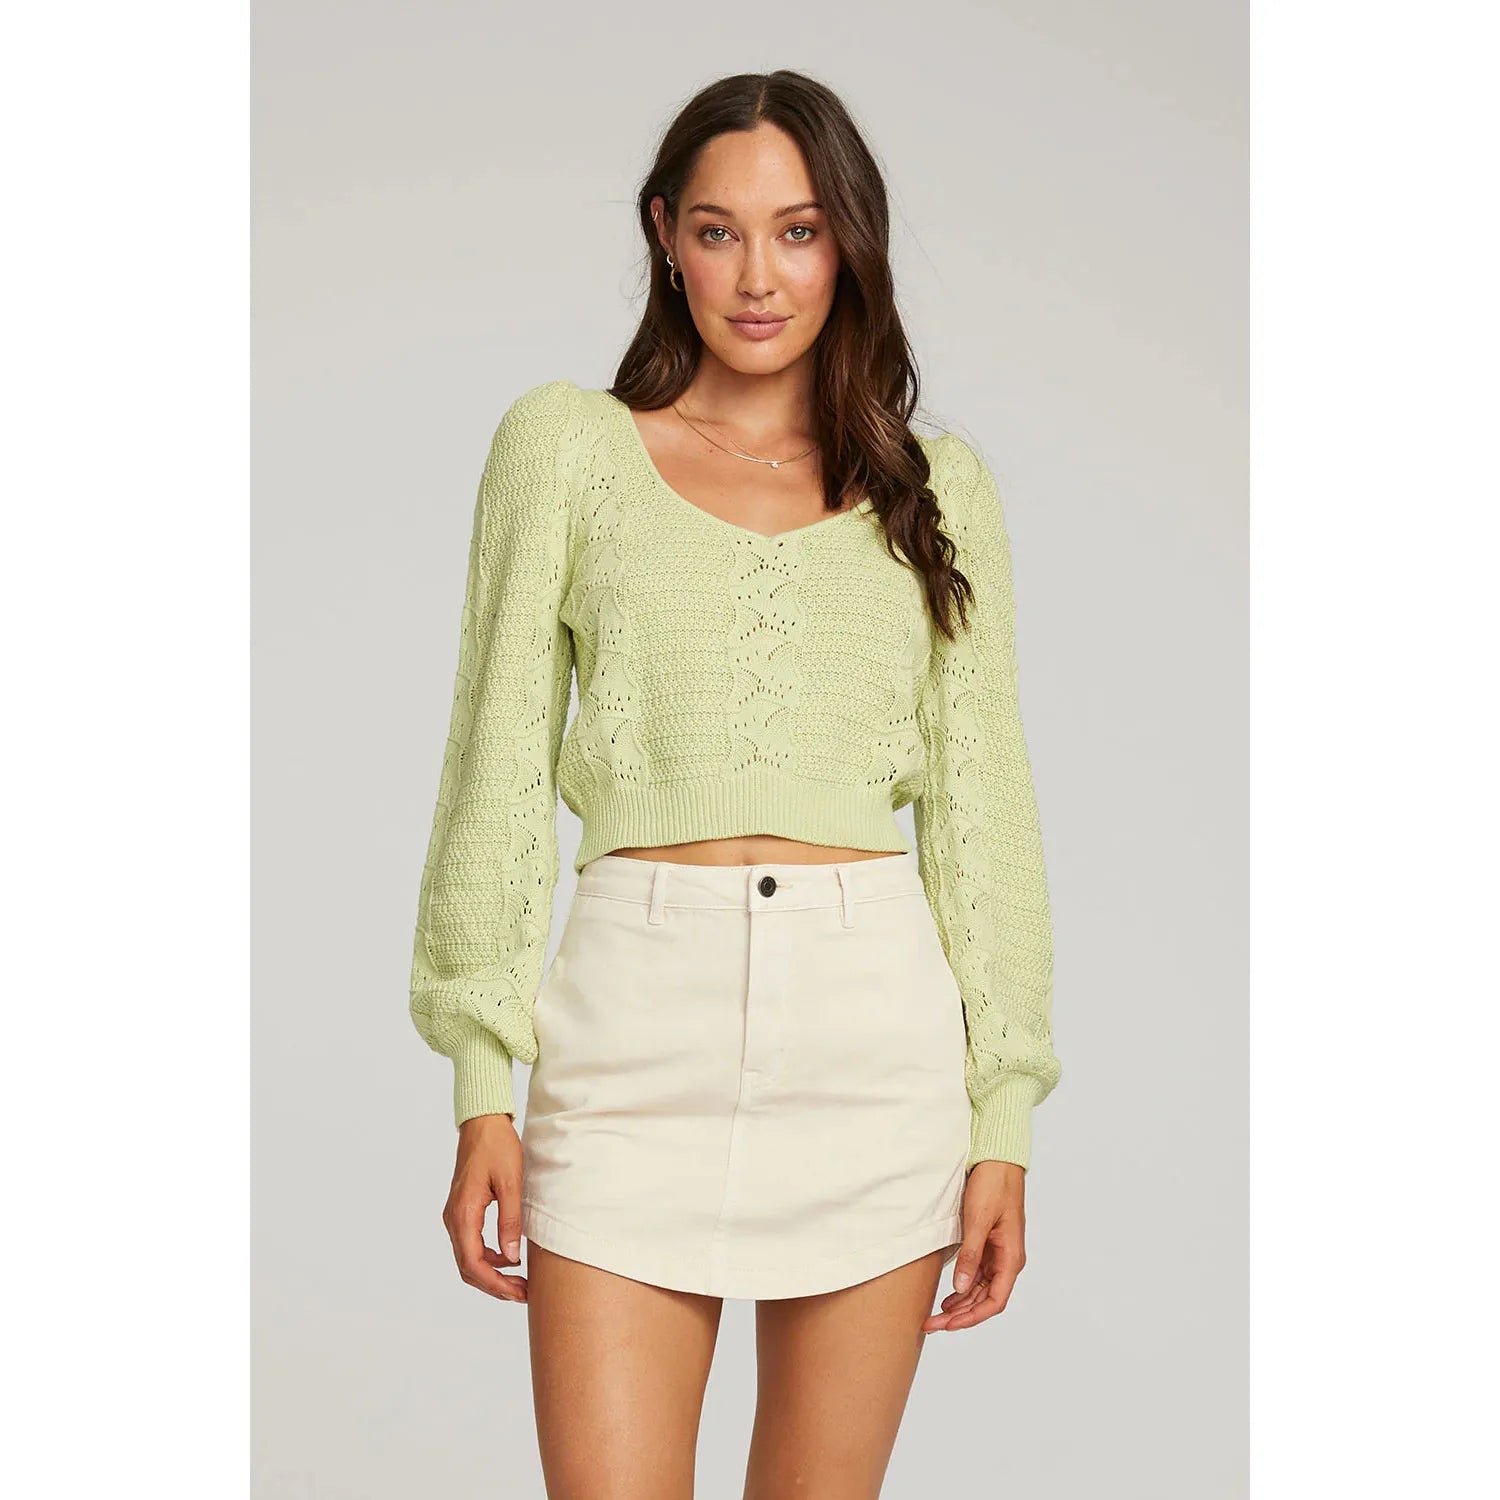 Saltwater Luxe - Karrinna Sweater in Limelight